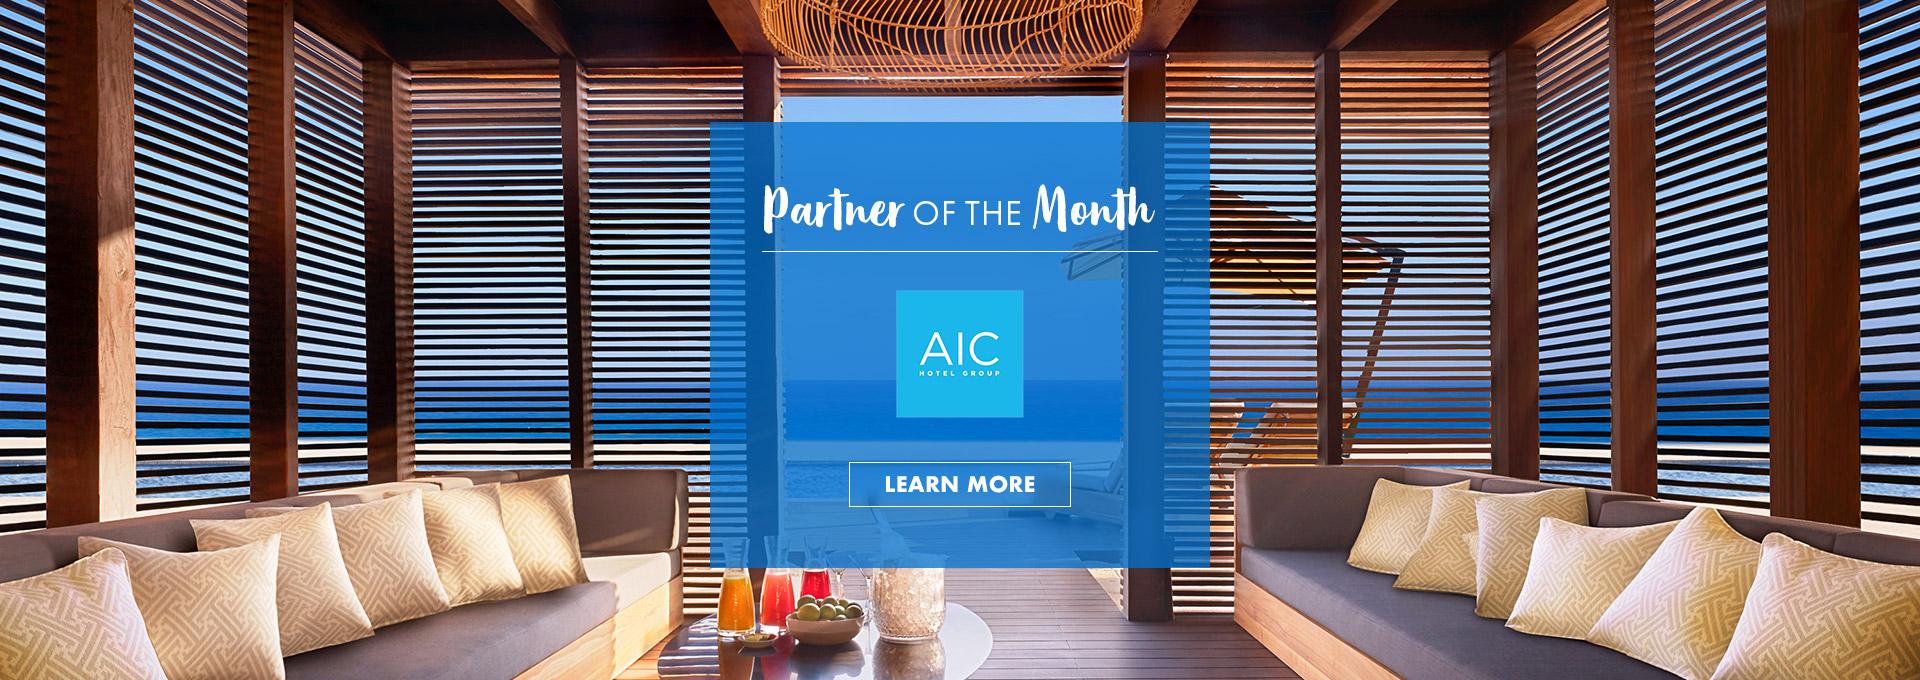 Partner of the Month